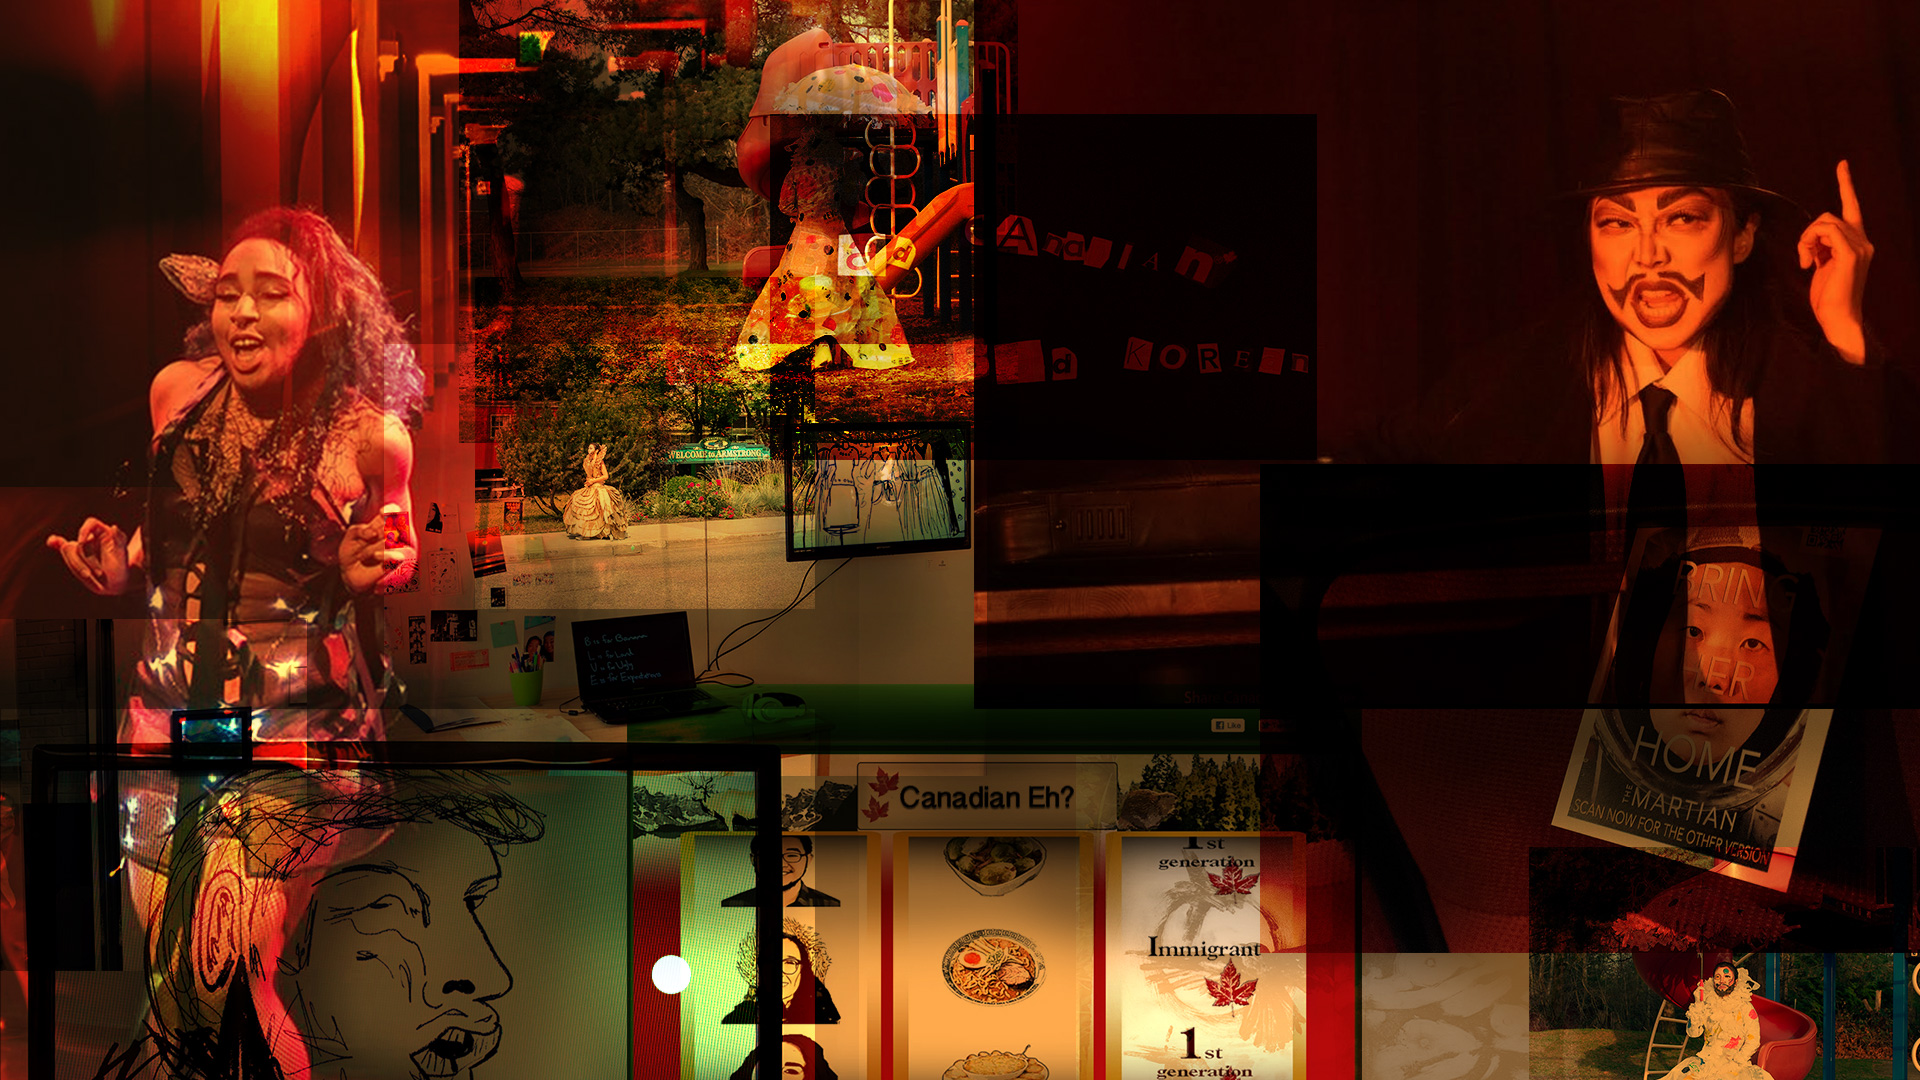 A collage of artworks from the Digital Carnival Z festival. The main two images are of Rye and Skim, while other images are layered with different amounts of transparency.